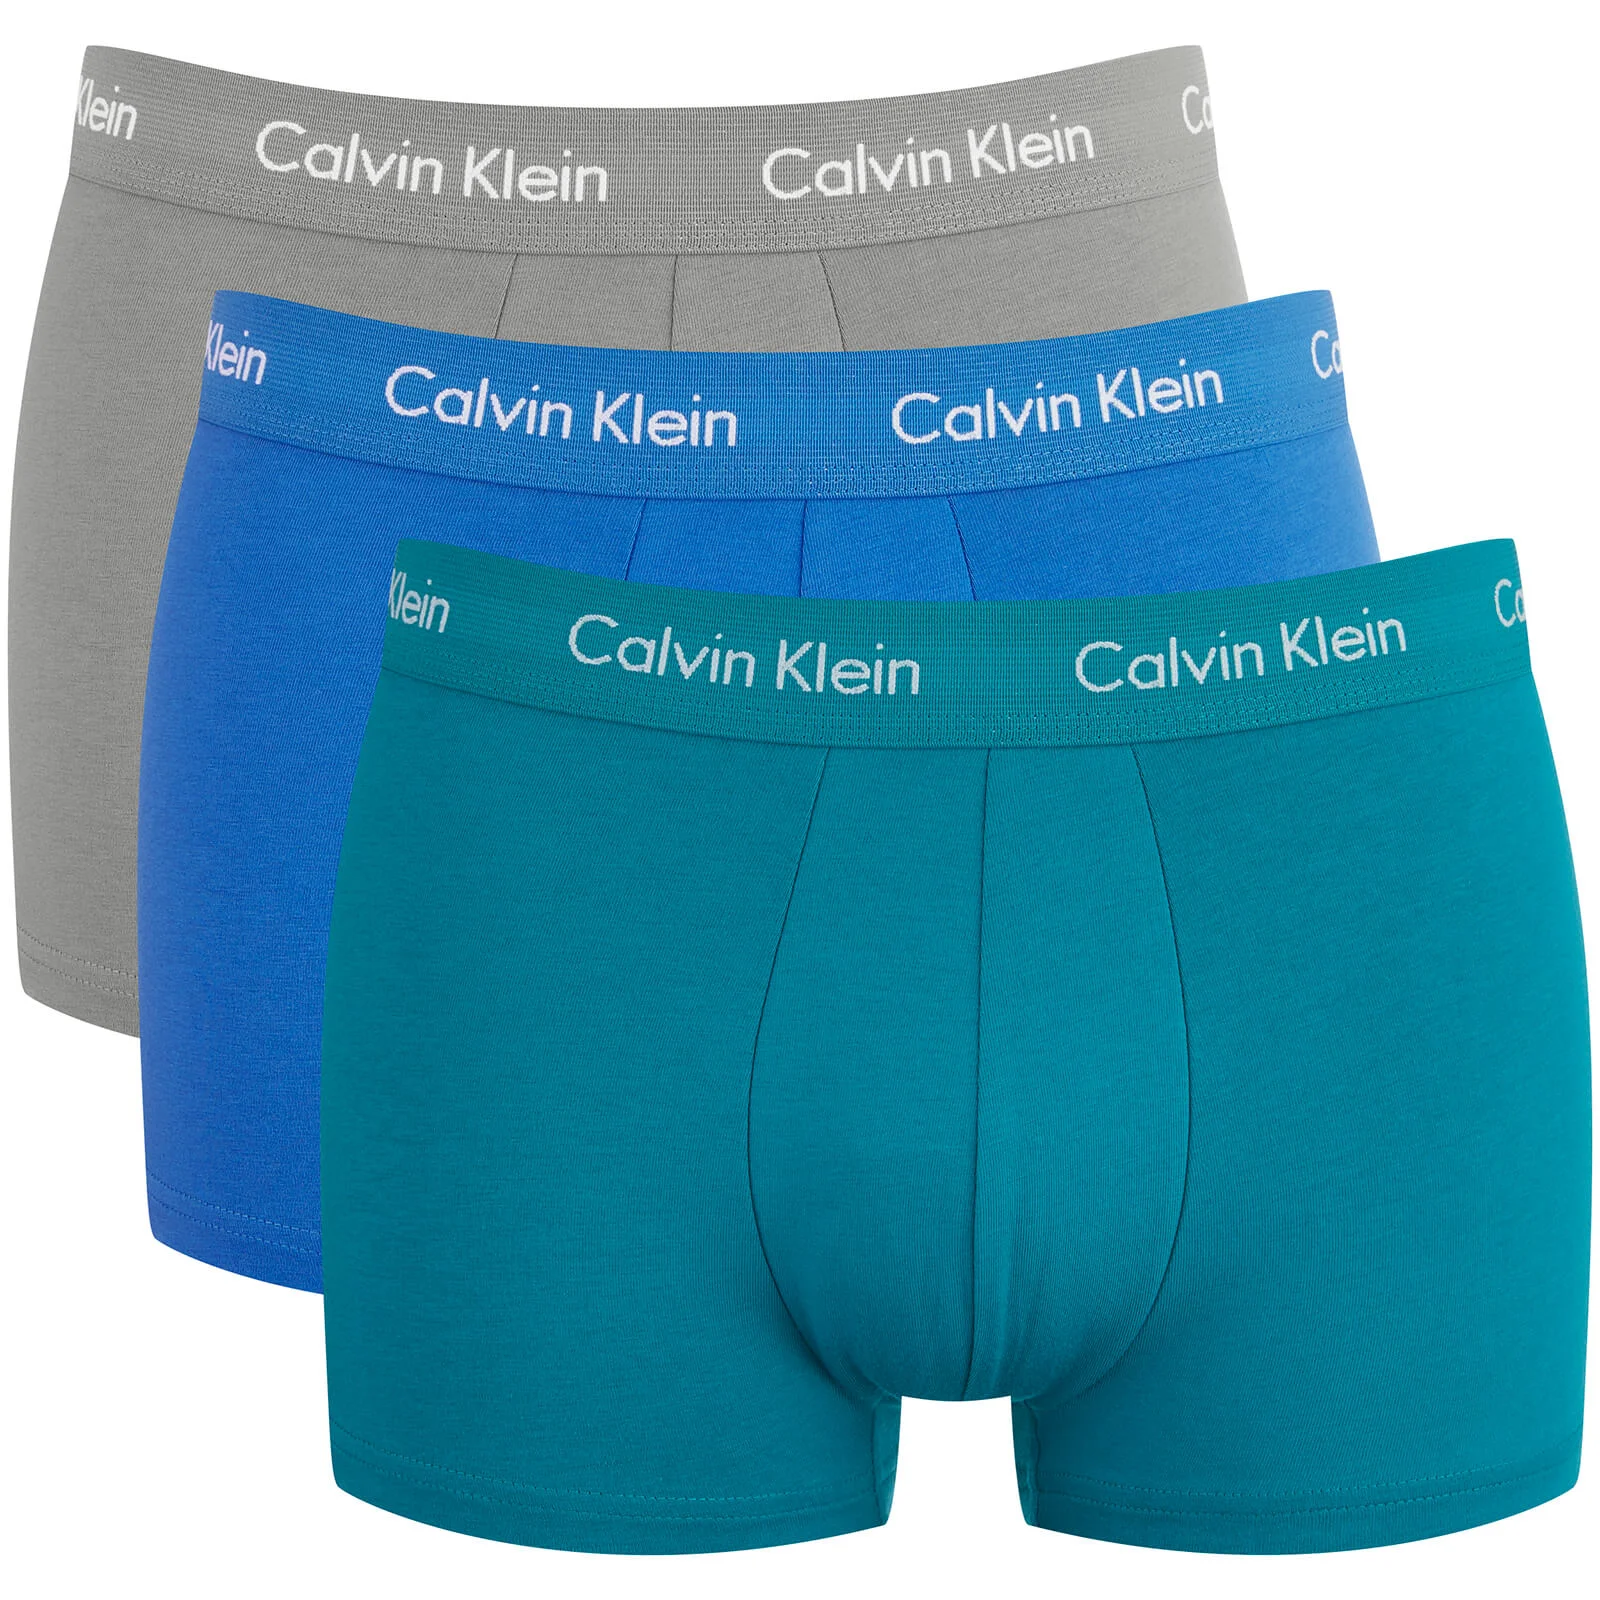 Calvin Klein Men's Cotton Stretch 3 Pack Low Rise Trunks - Blue/Green/Grey Image 1